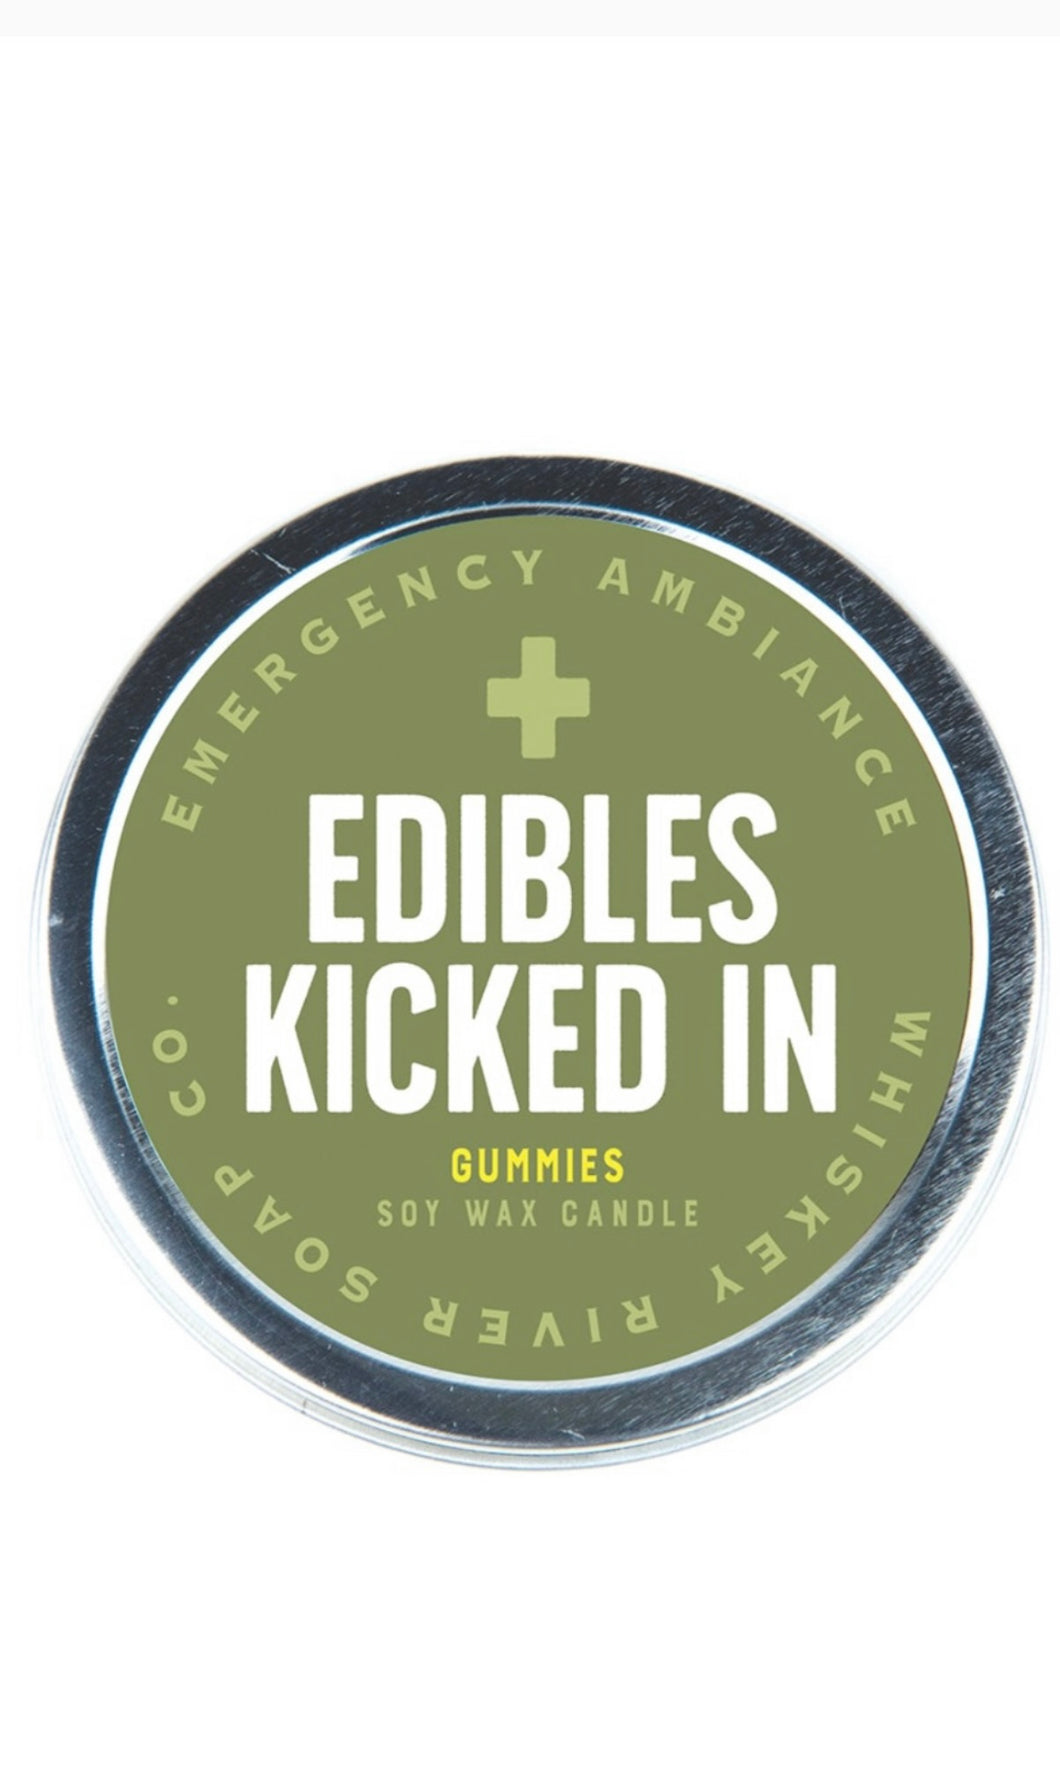 Whiskey River “Edibles Kicked In” Emergency Ambiance Tin Candles